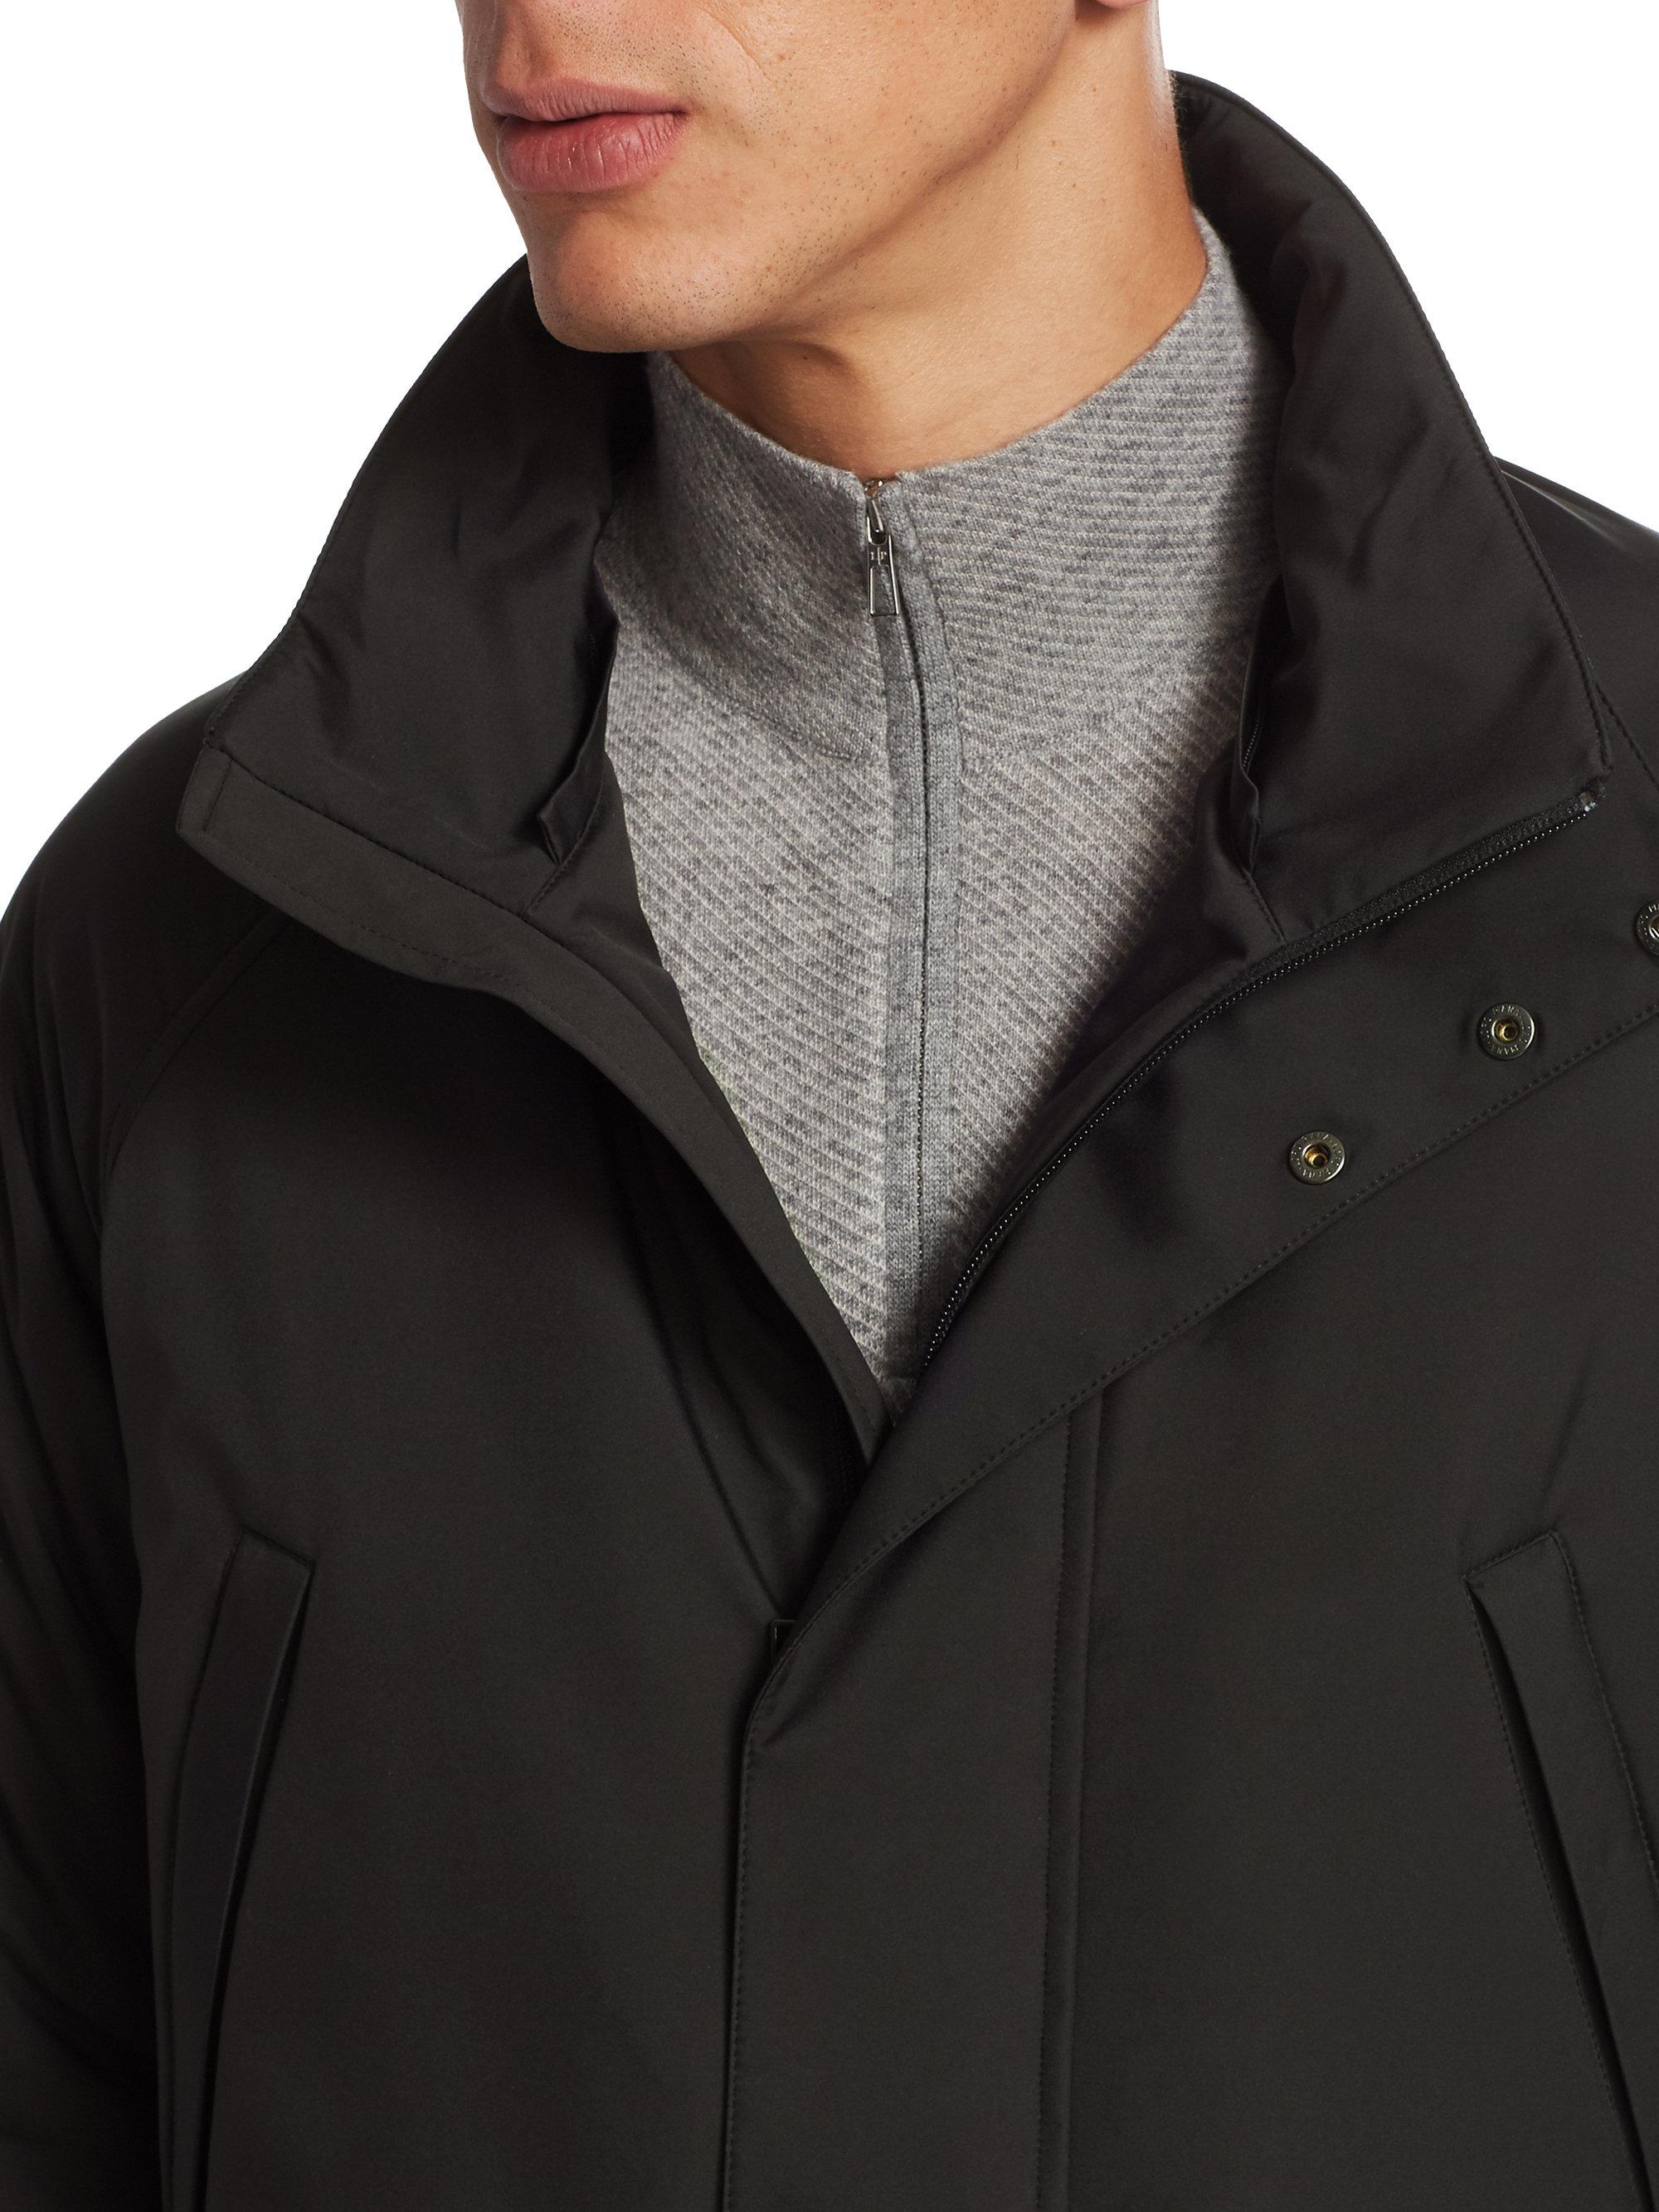 Loro Piana Synthetic Wind Icer Classic Ski Jacket in Onyx (Black) for Men - Lyst